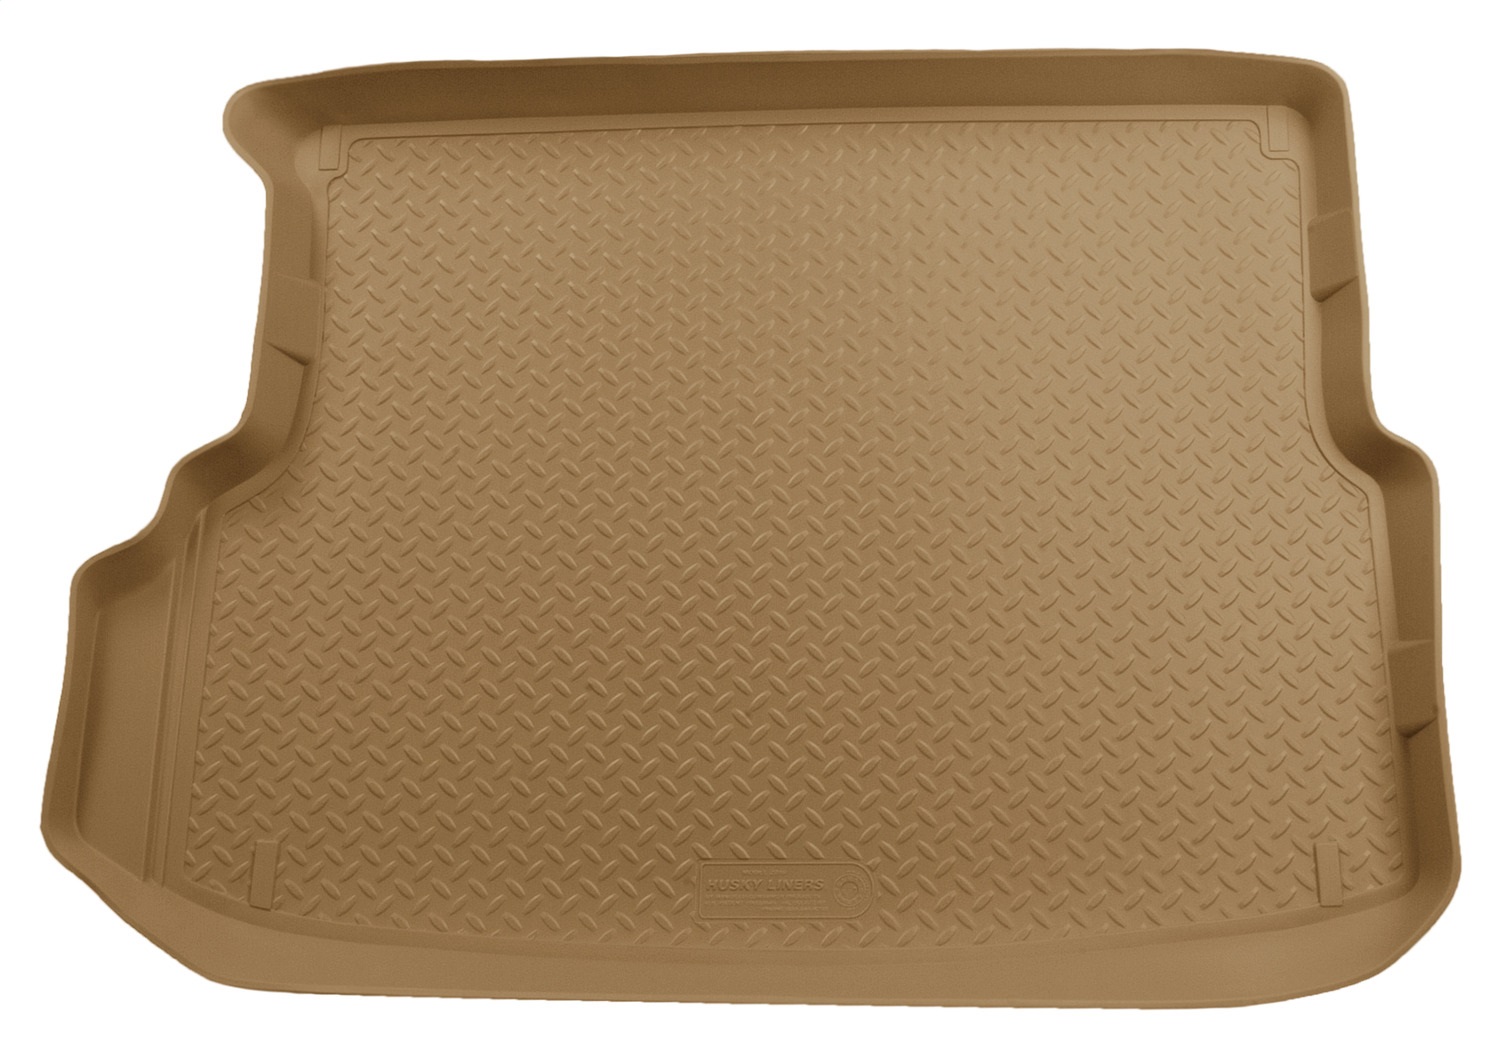 Husky Liners Husky Liners 23163 Classic Style; Cargo Liner Fits 08-12 Escape Mariner Tribute